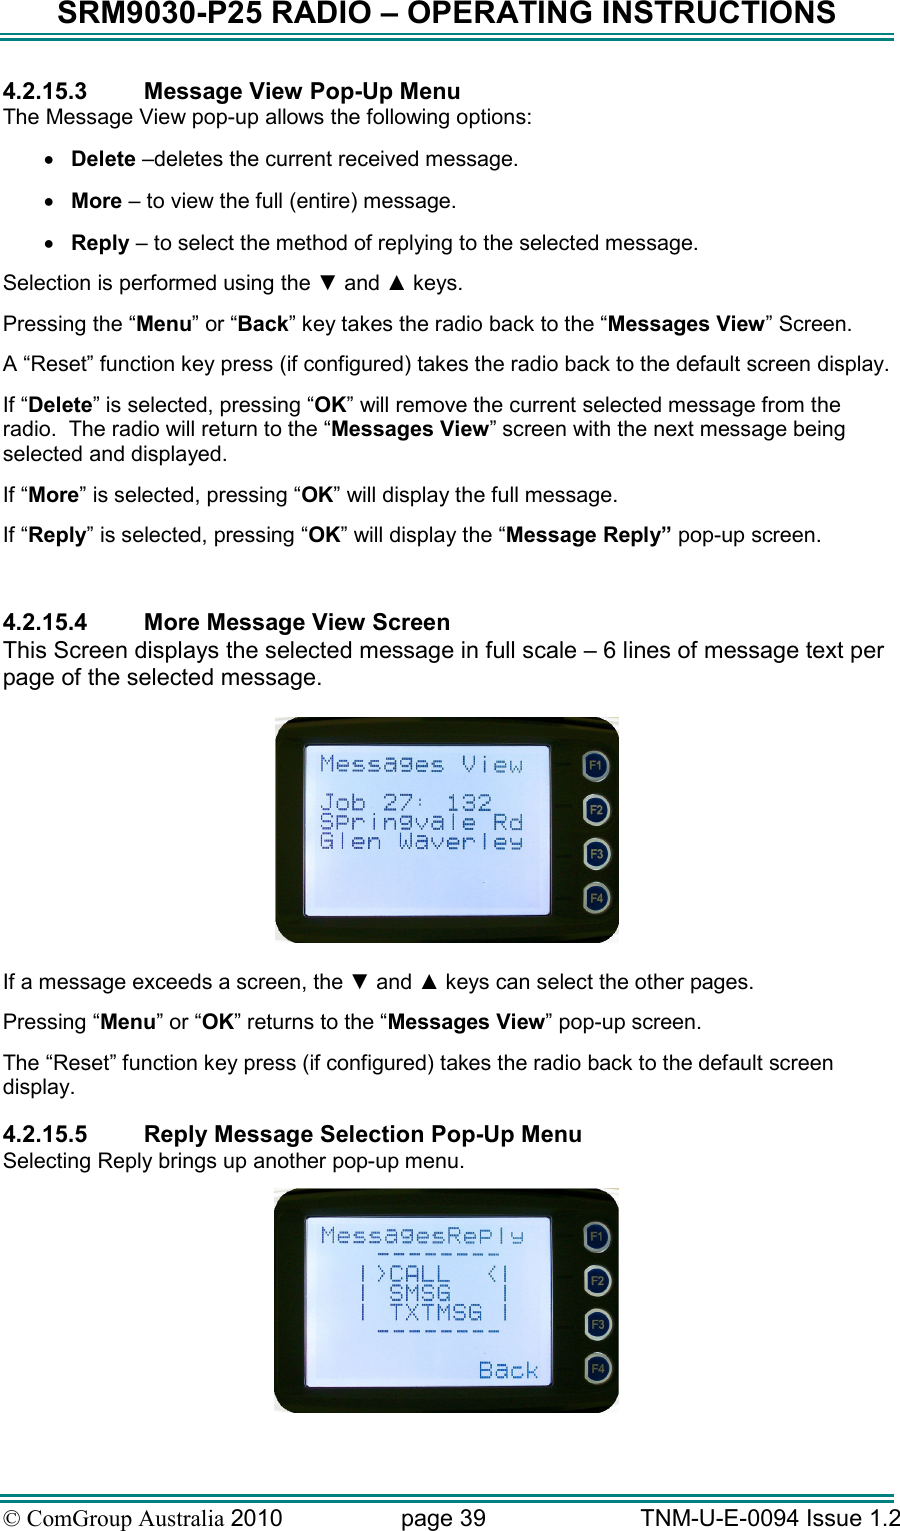 SRM9030-P25 RADIO – OPERATING INSTRUCTIONS © ComGroup Australia 2010  page 39   TNM-U-E-0094 Issue 1.2 4.2.15.3  Message View Pop-Up Menu The Message View pop-up allows the following options: • Delete –deletes the current received message. • More – to view the full (entire) message. • Reply – to select the method of replying to the selected message. Selection is performed using the ▼ and ▲ keys. Pressing the “Menu” or “Back” key takes the radio back to the “Messages View” Screen. A “Reset” function key press (if configured) takes the radio back to the default screen display. If “Delete” is selected, pressing “OK” will remove the current selected message from the radio.  The radio will return to the “Messages View” screen with the next message being selected and displayed. If “More” is selected, pressing “OK” will display the full message. If “Reply” is selected, pressing “OK” will display the “Message Reply” pop-up screen.  4.2.15.4  More Message View Screen This Screen displays the selected message in full scale – 6 lines of message text per page of the selected message.    If a message exceeds a screen, the ▼ and ▲ keys can select the other pages. Pressing “Menu” or “OK” returns to the “Messages View” pop-up screen. The “Reset” function key press (if configured) takes the radio back to the default screen display. 4.2.15.5  Reply Message Selection Pop-Up Menu Selecting Reply brings up another pop-up menu.   